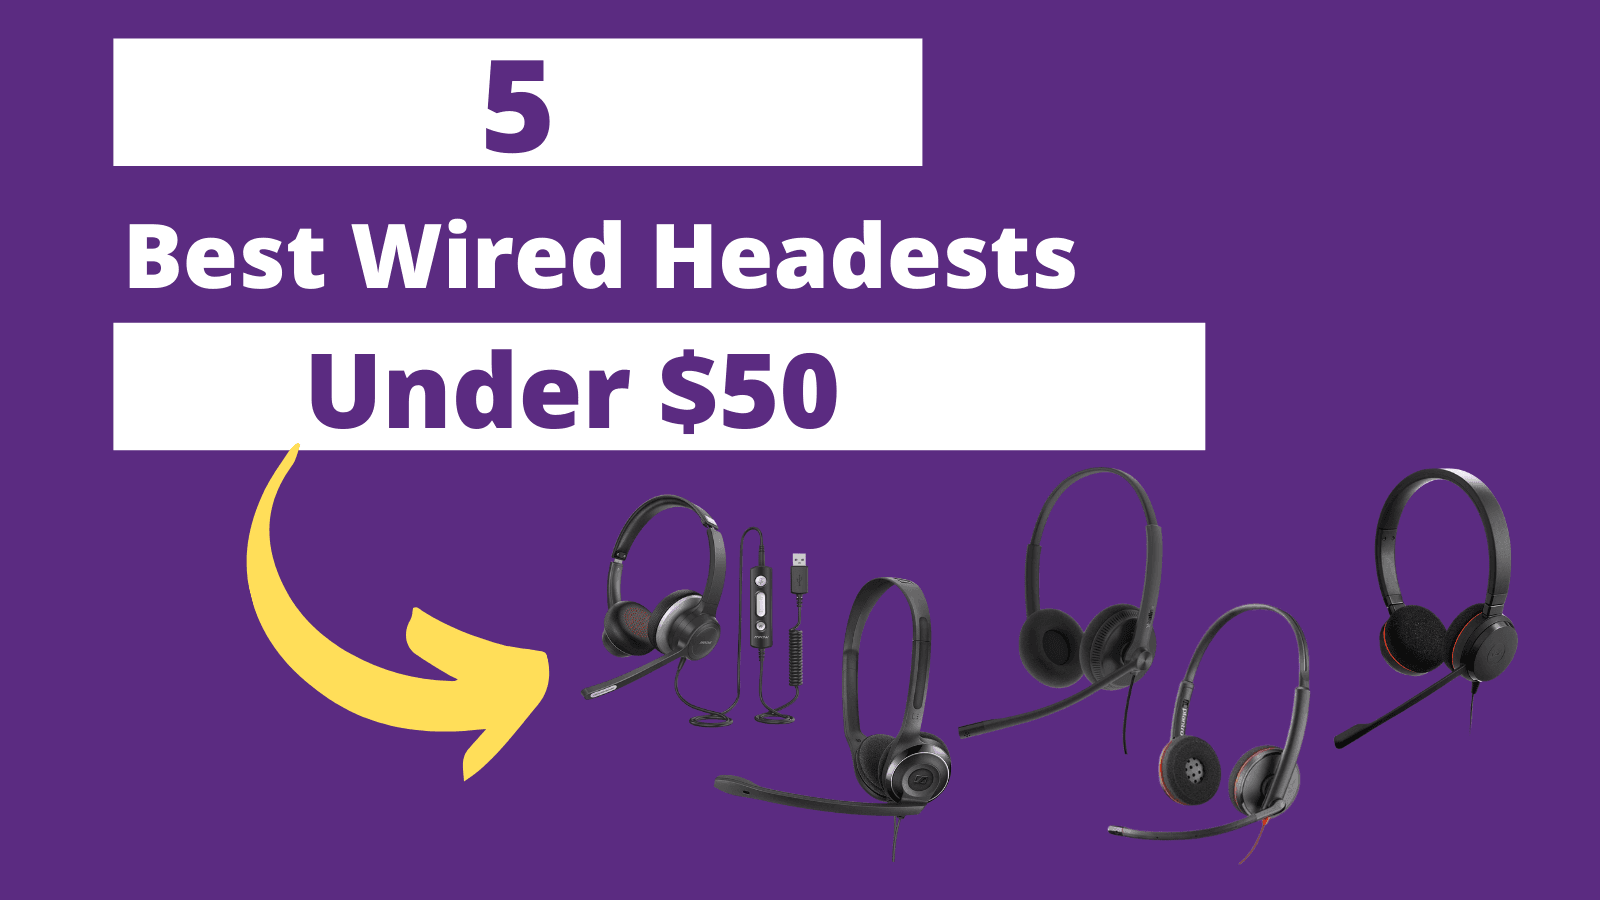 5 Best Wired USB Headsets For Business Under $50 + Live Mic Test VIDEO - Headset Advisor